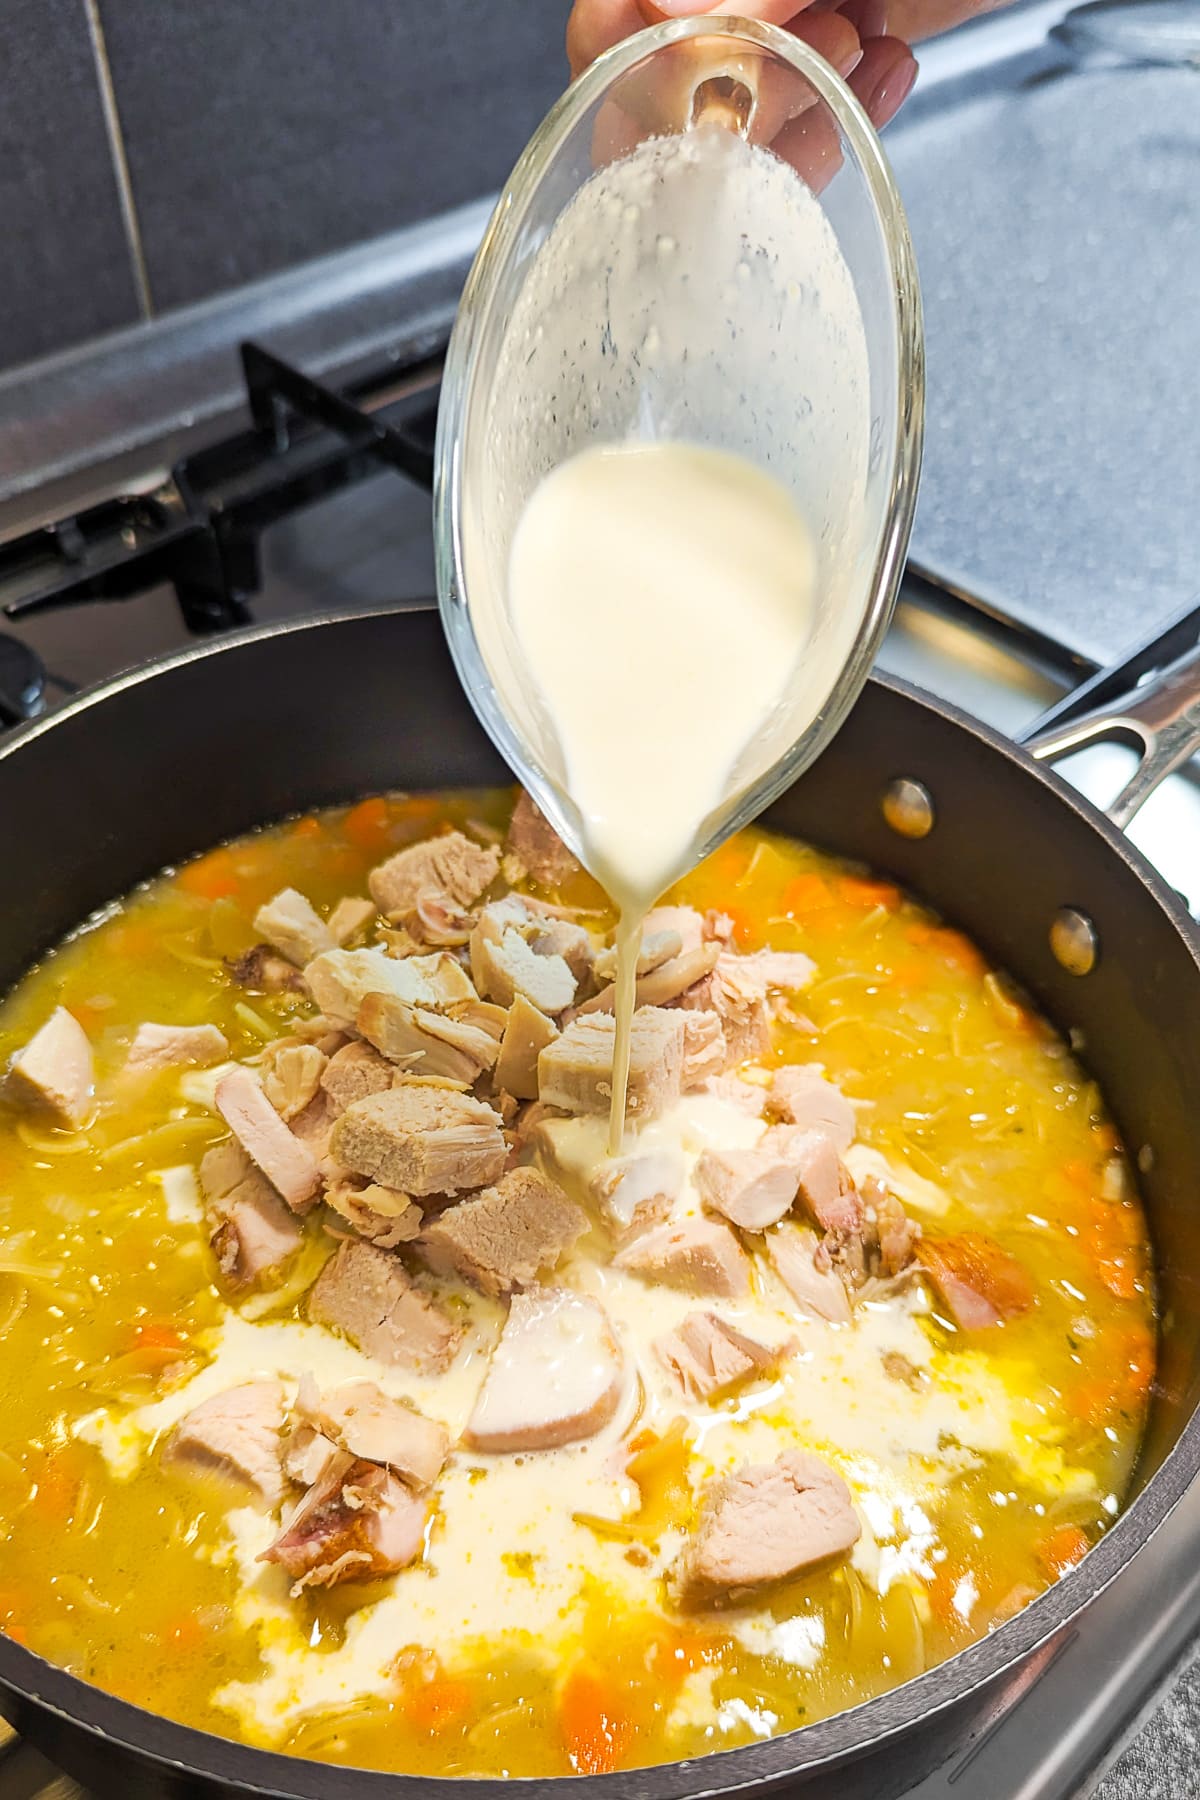 Pouring cream over turkey meat and vegetable soup in a deep frying pan on the stove.